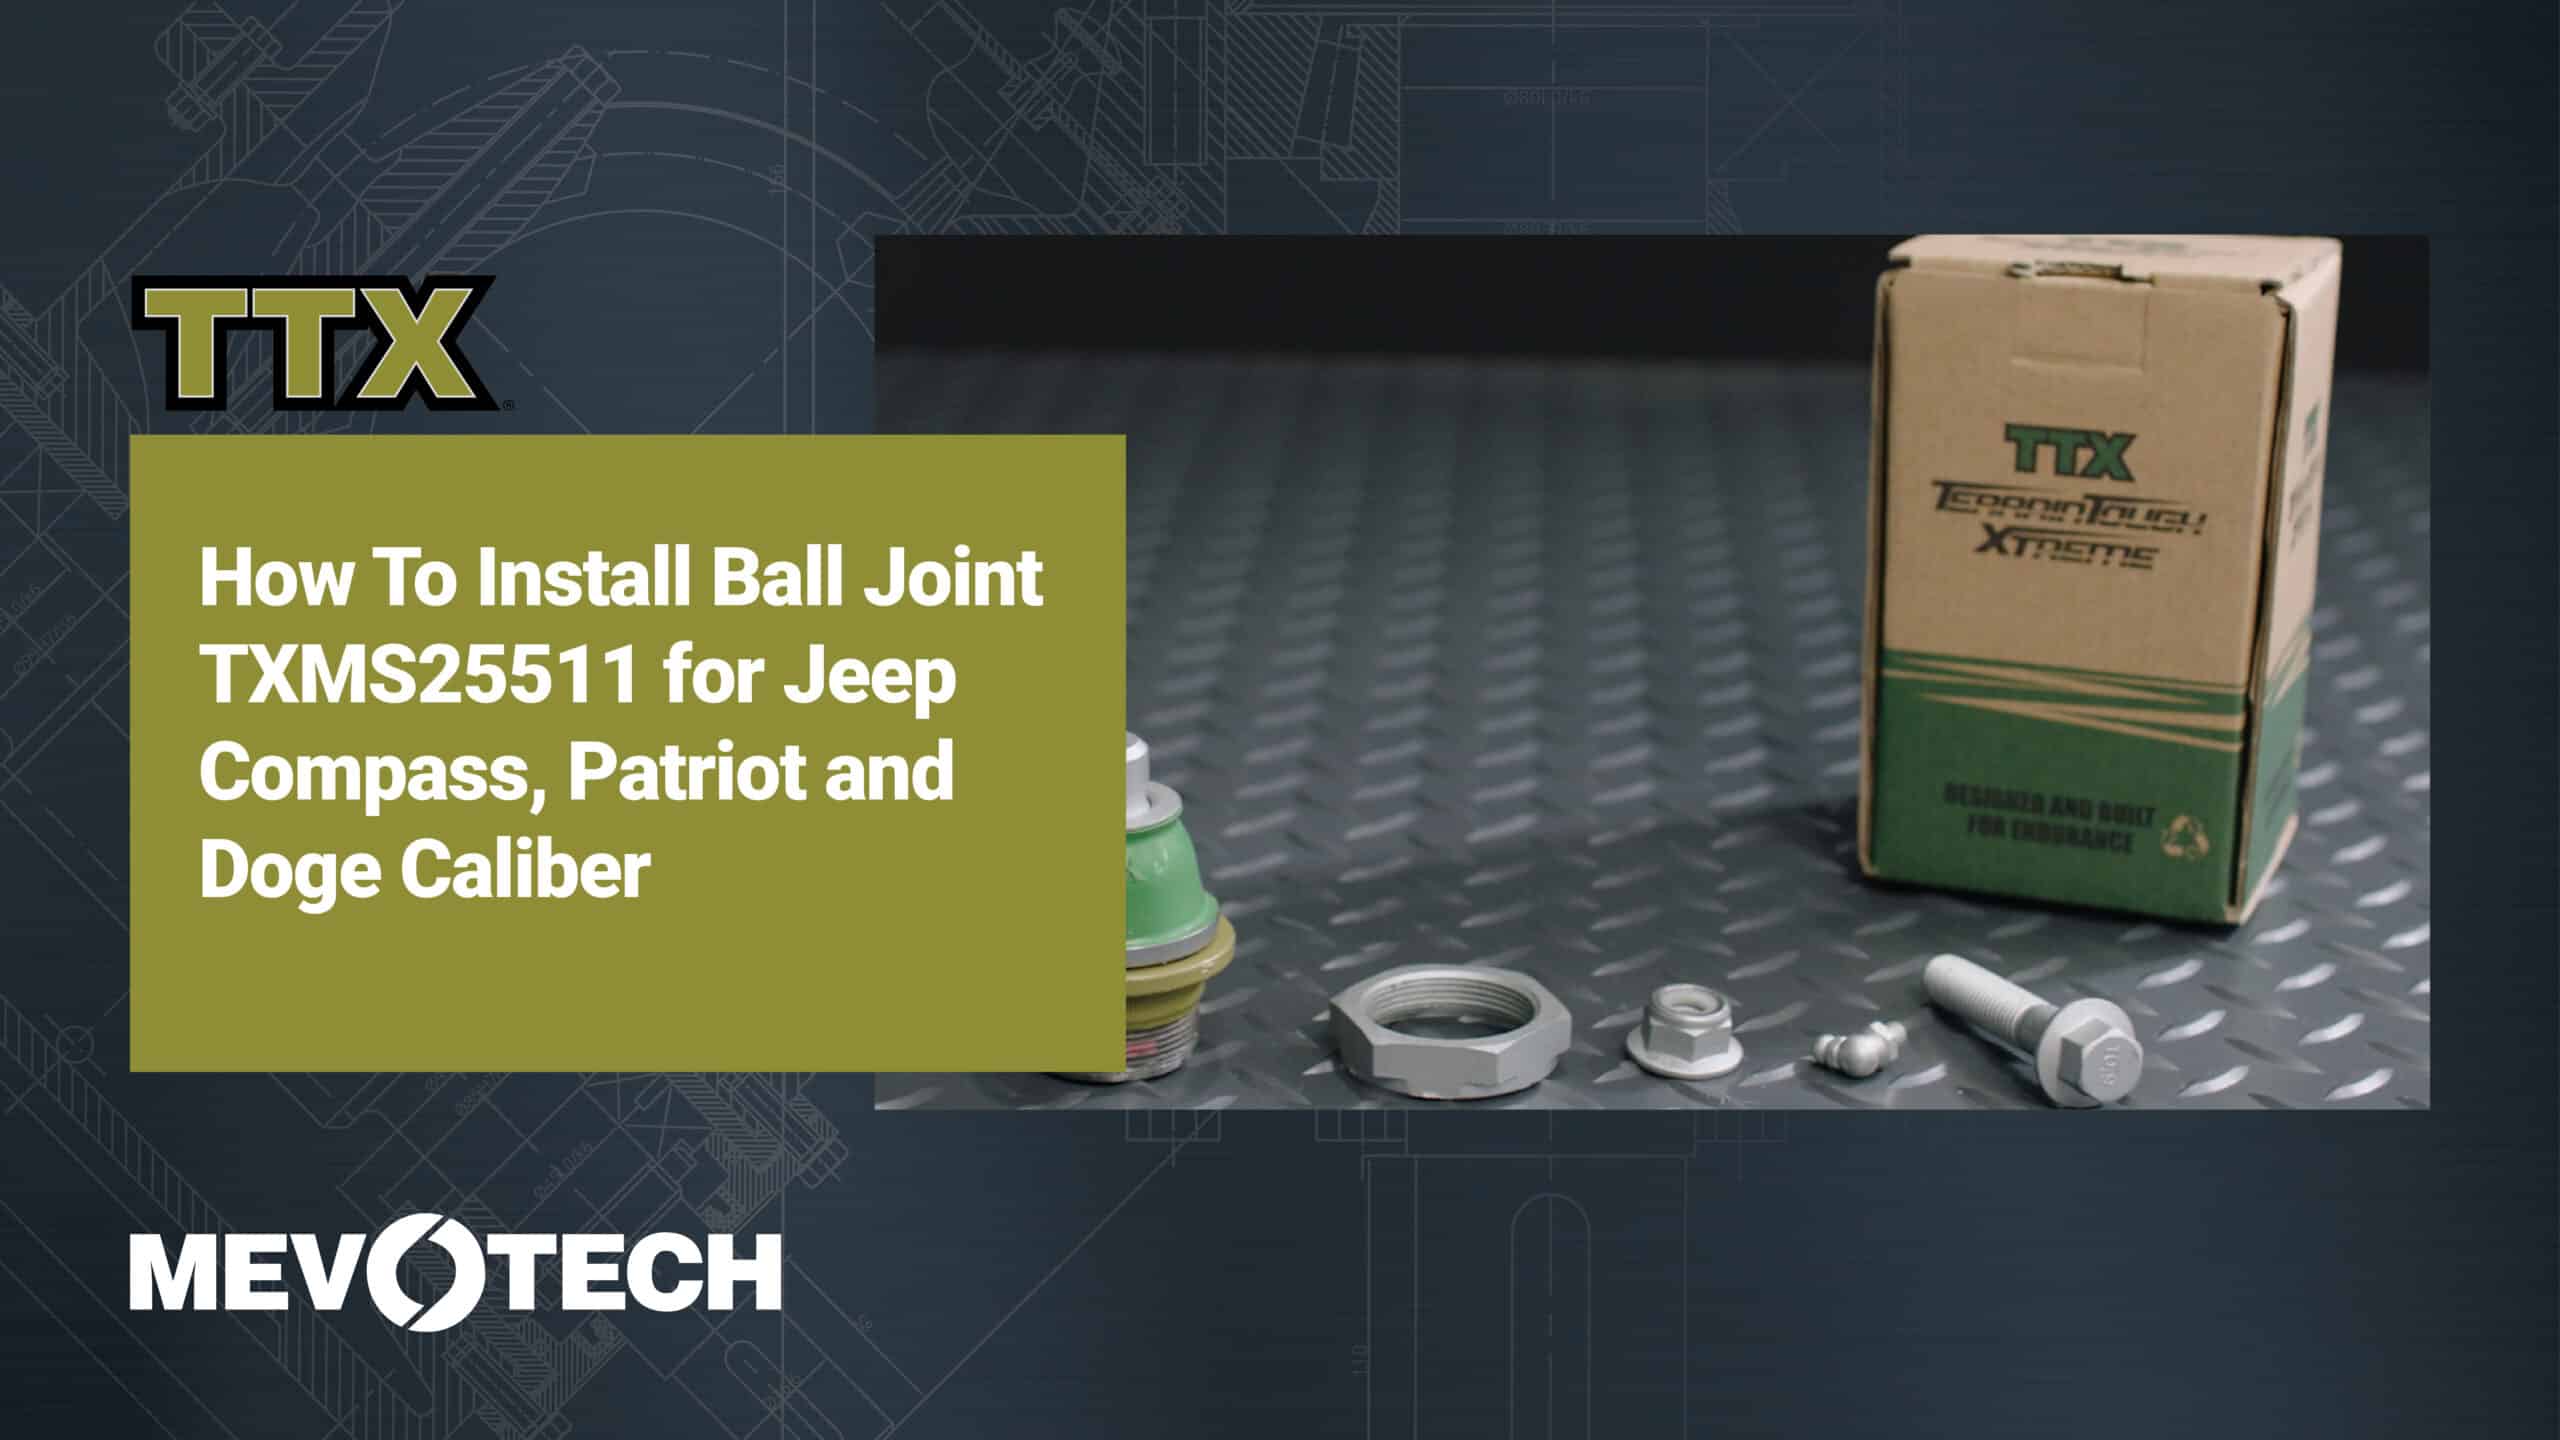 How to Install TTX Ball Joint TXMS25511